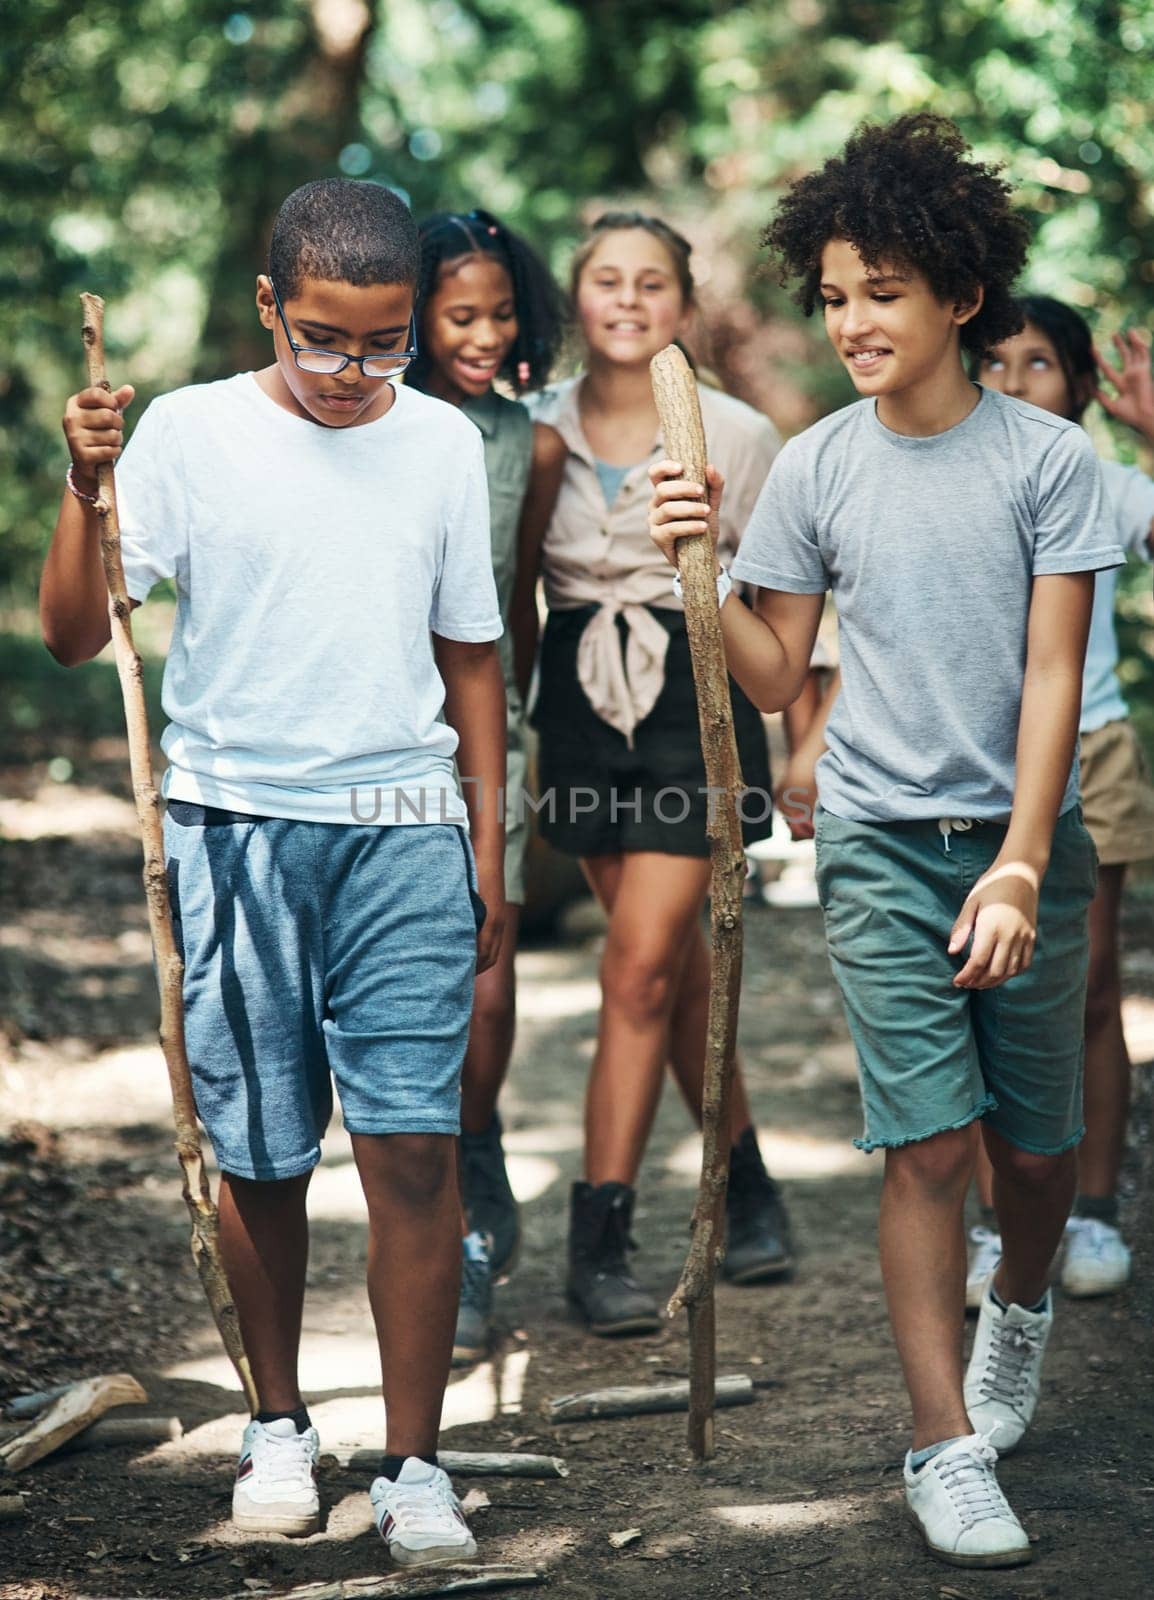 Camp time is adventure time. a group of teenagers exploring nature together at summer camp. by YuriArcurs